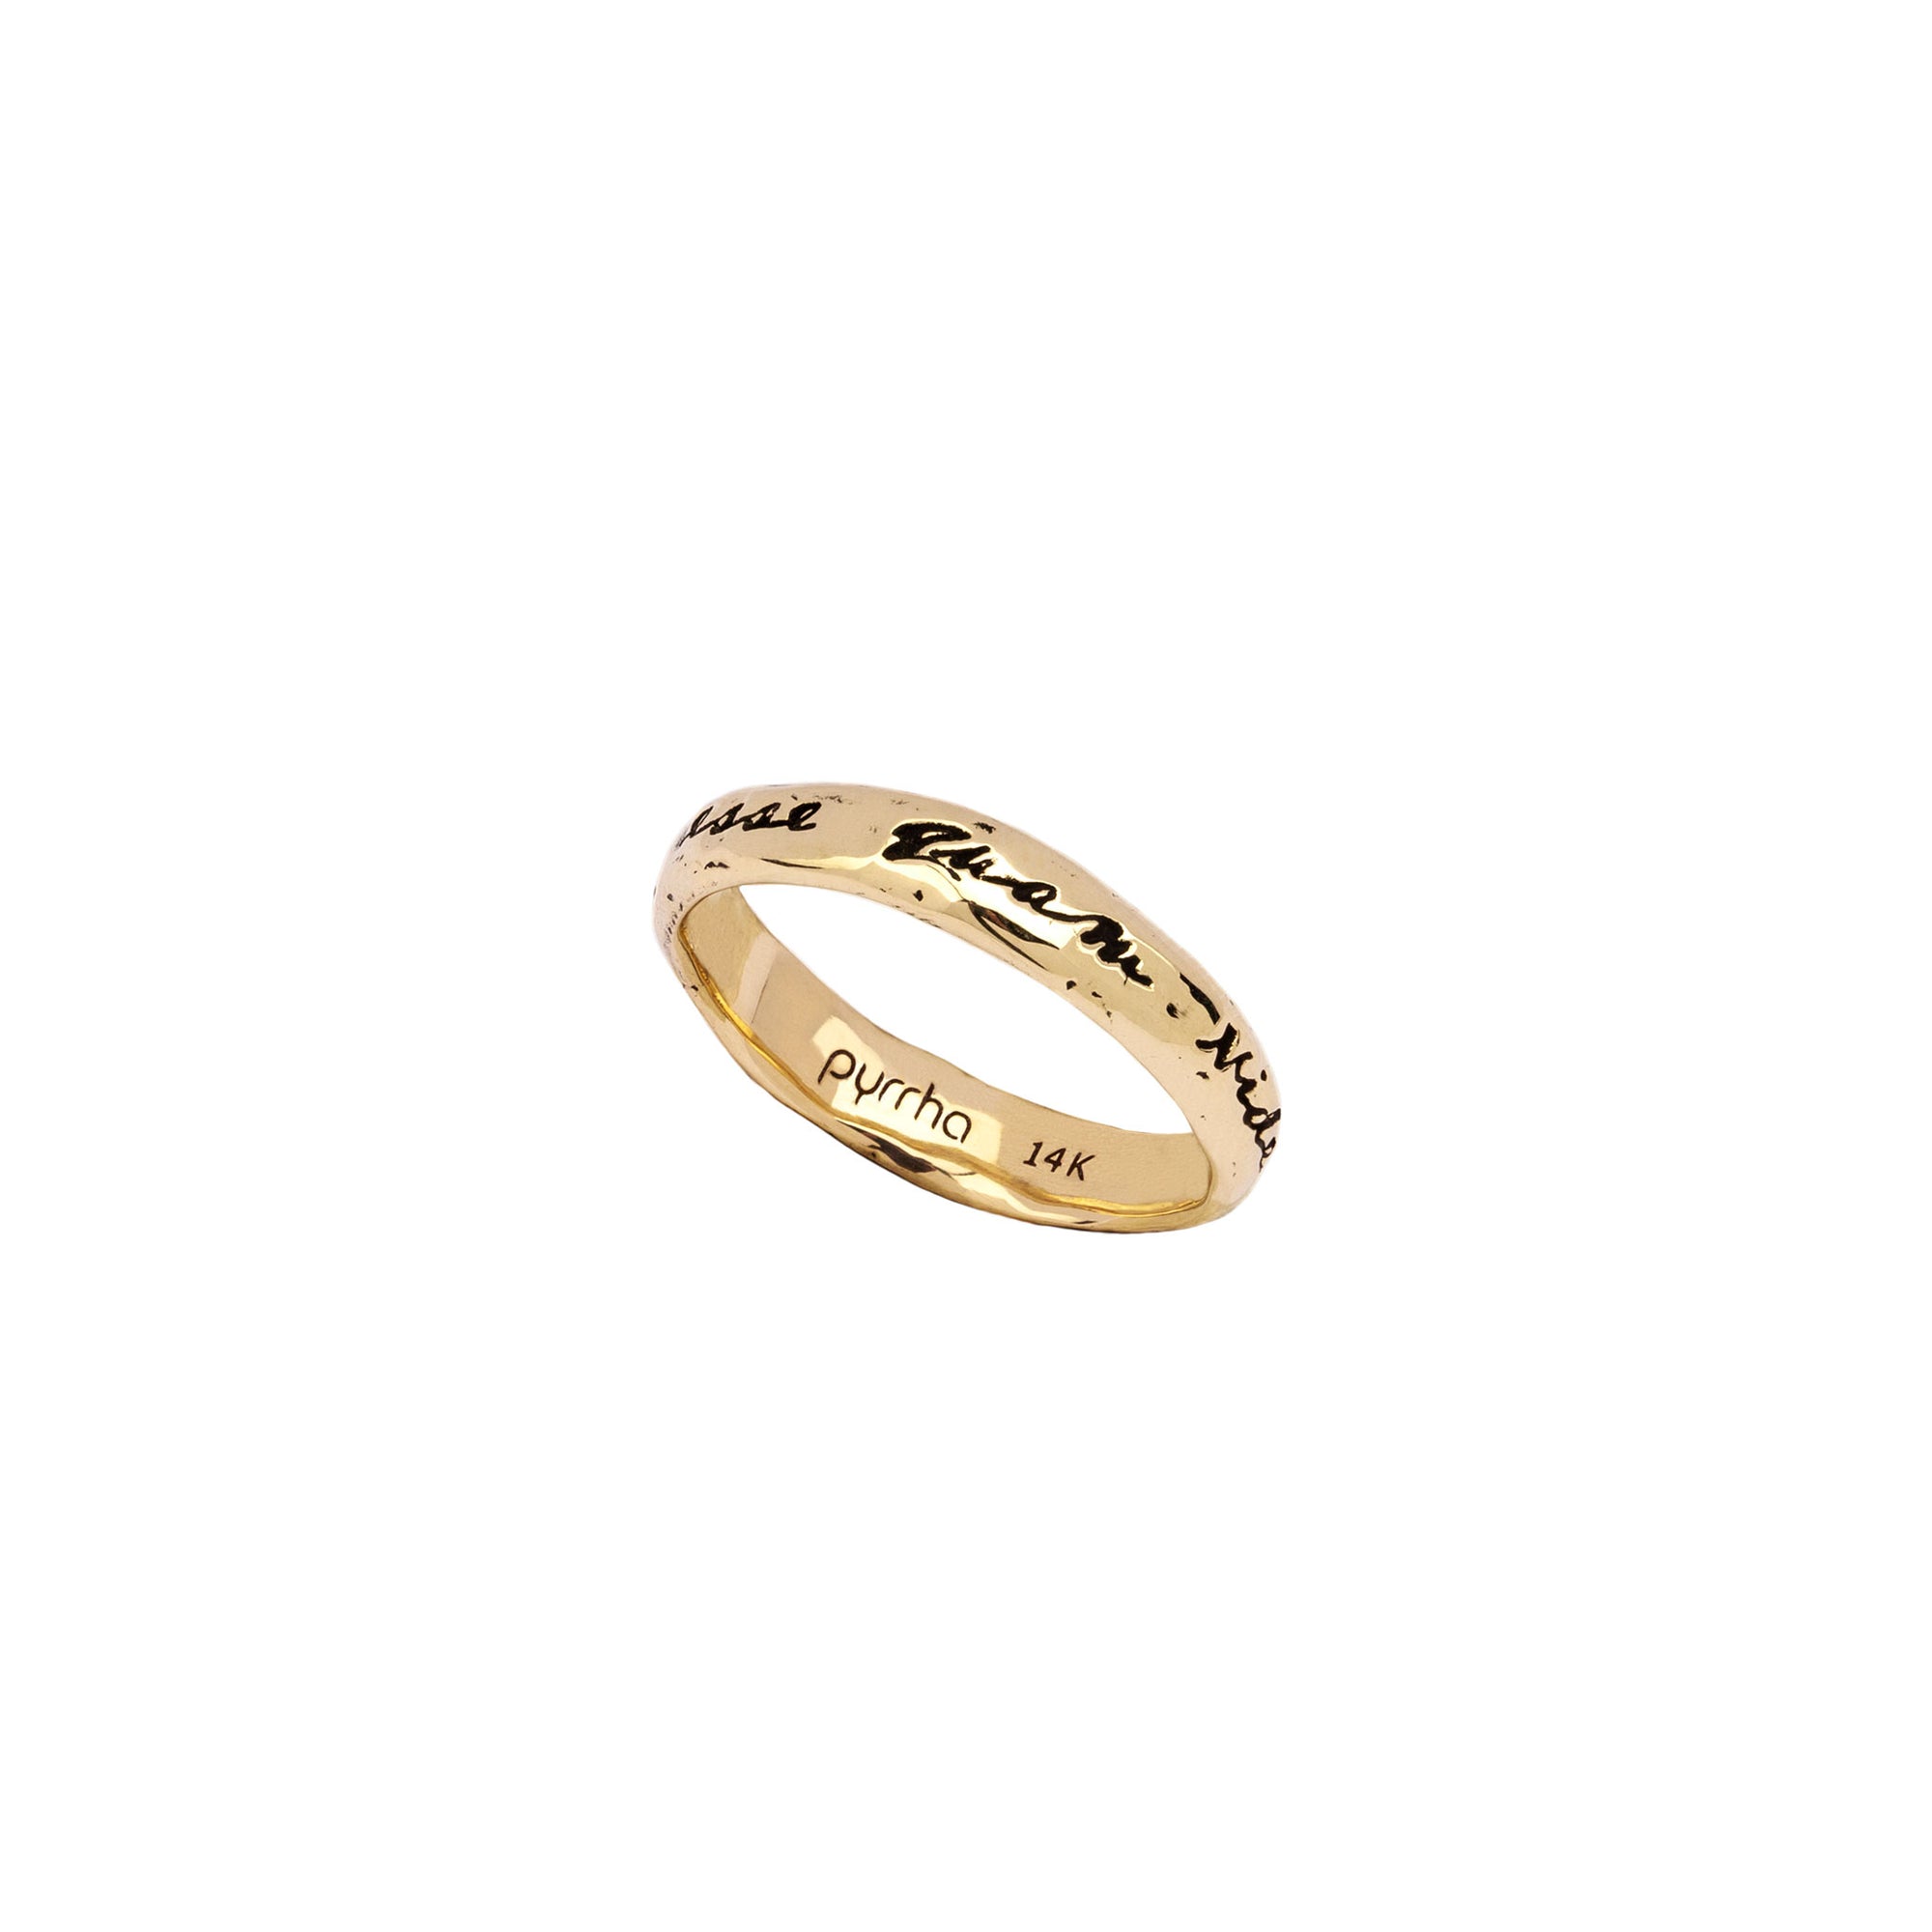 A 14k gold ring engraved with our To Be Rather Than To Seem motto.